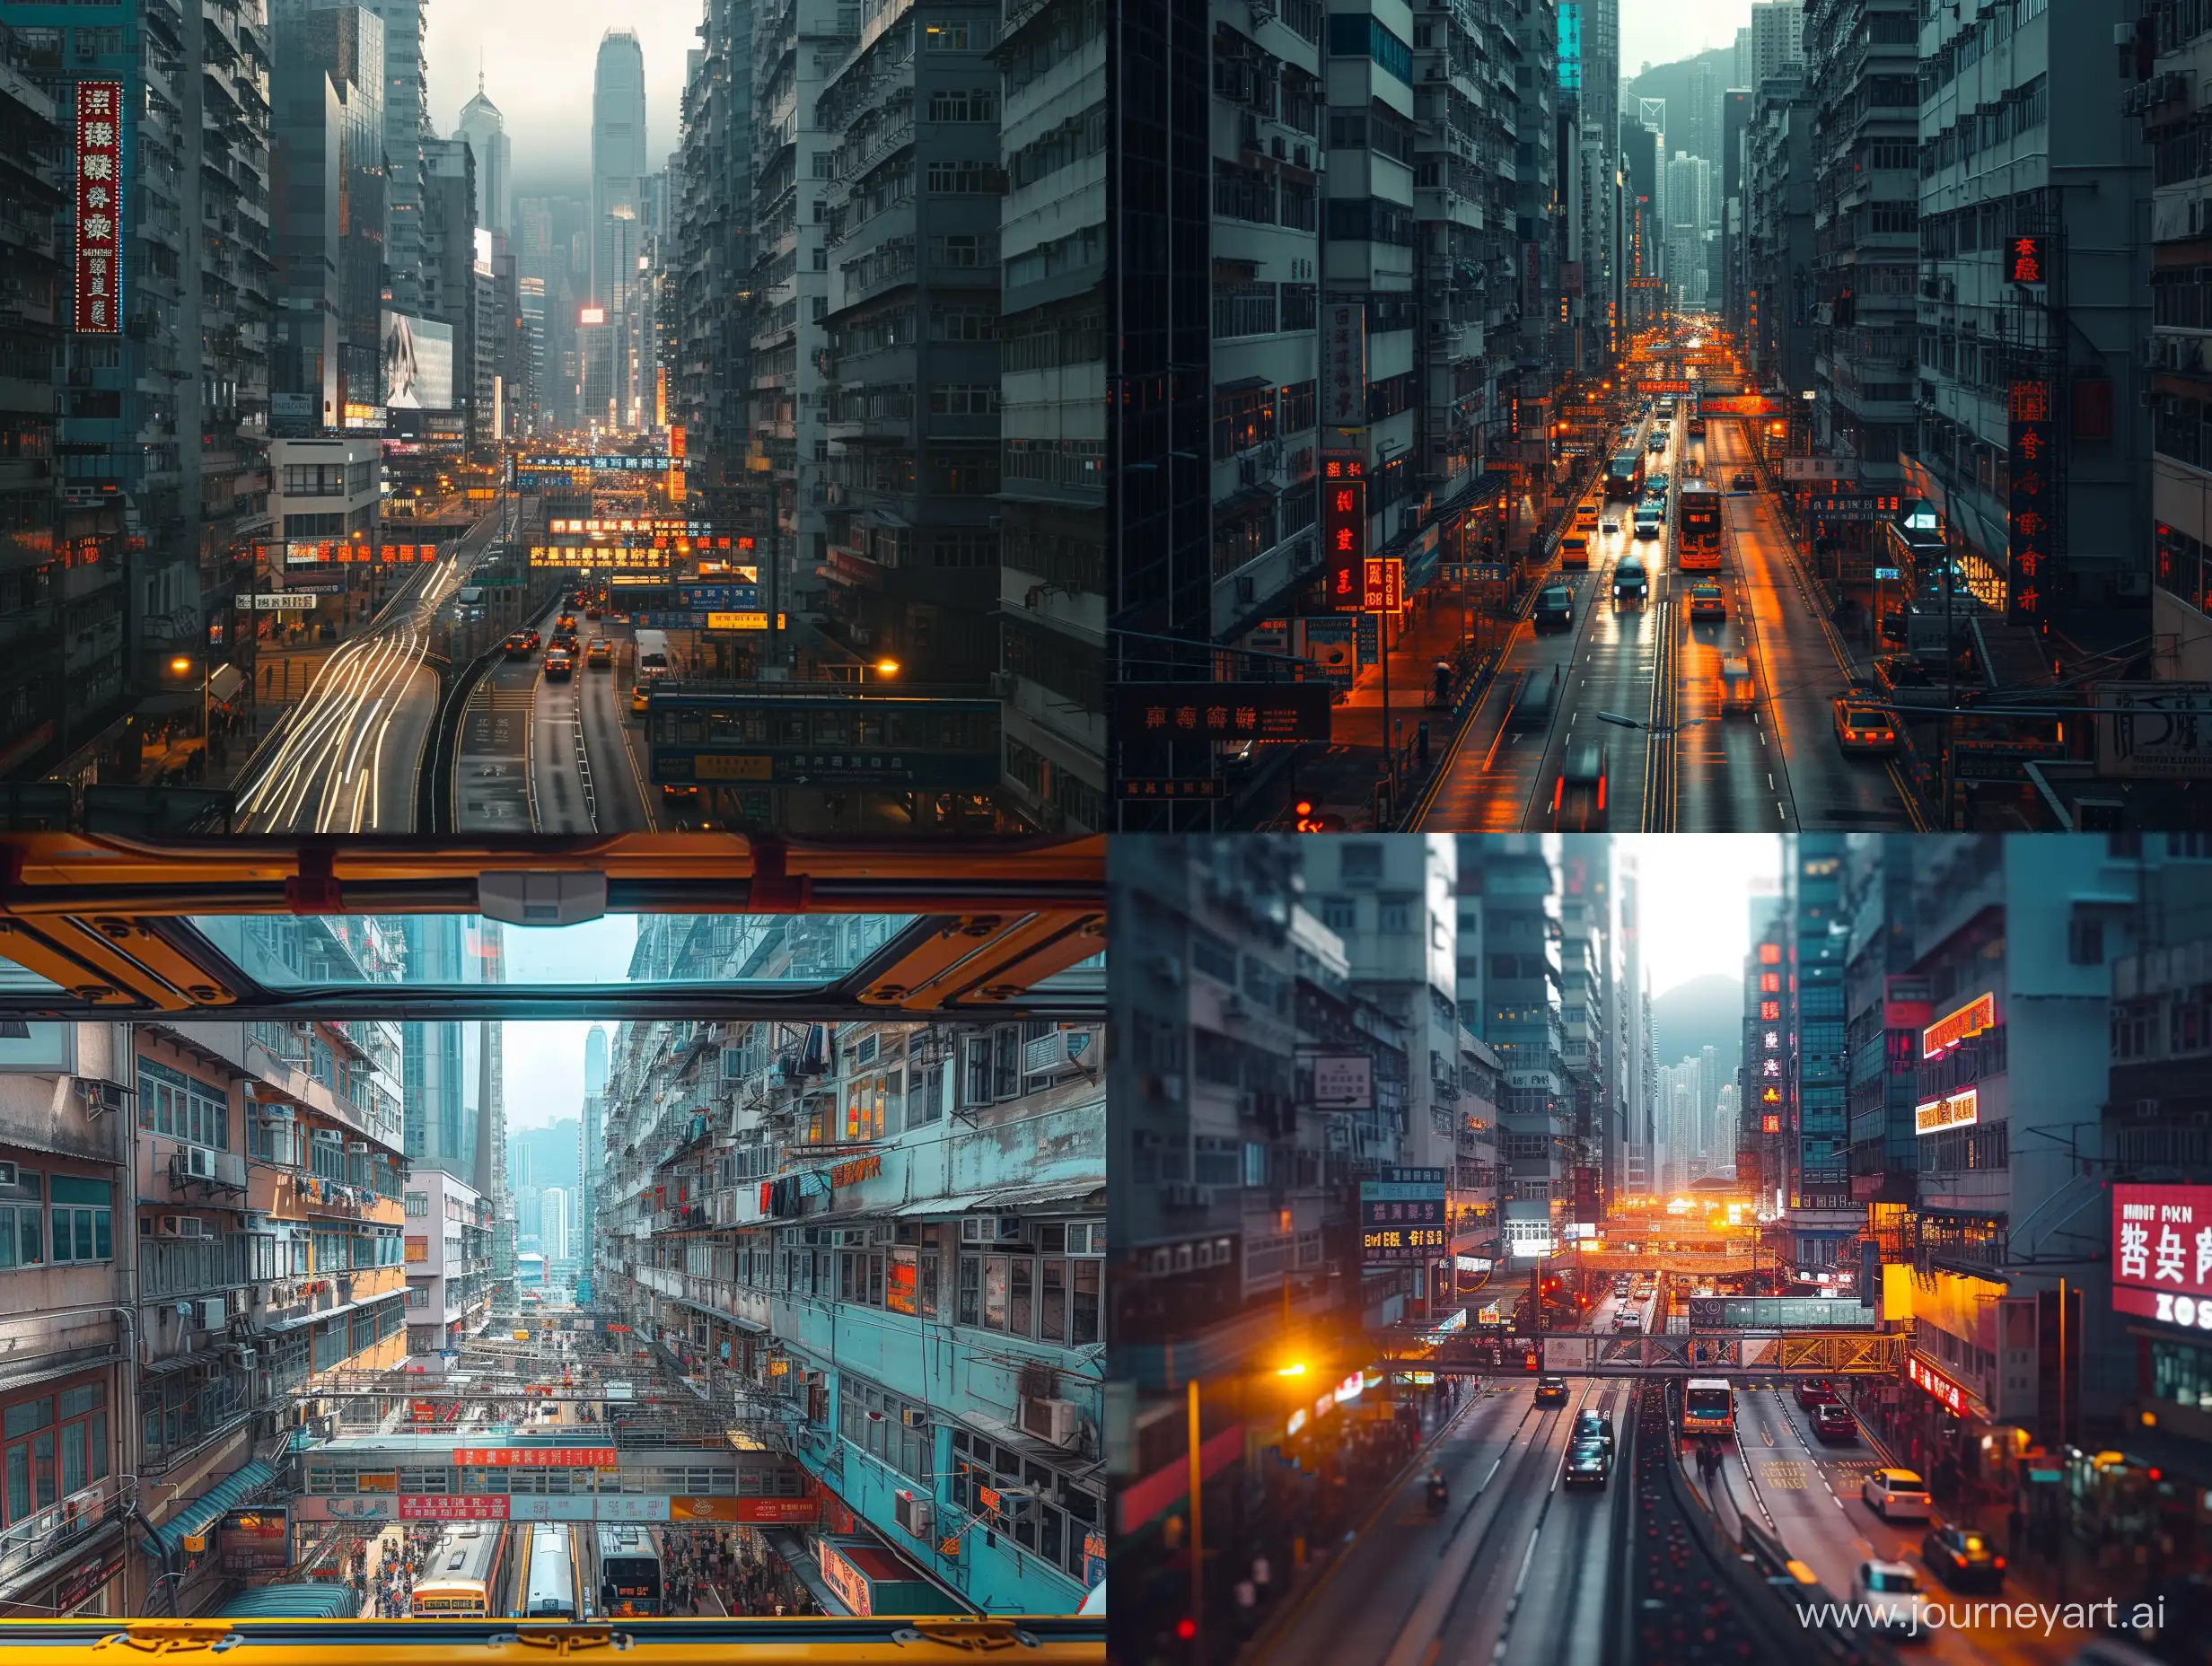 Futuristic-Hong-Kong-Cityscape-SciFi-Photography-with-Vibrant-Urban-Life